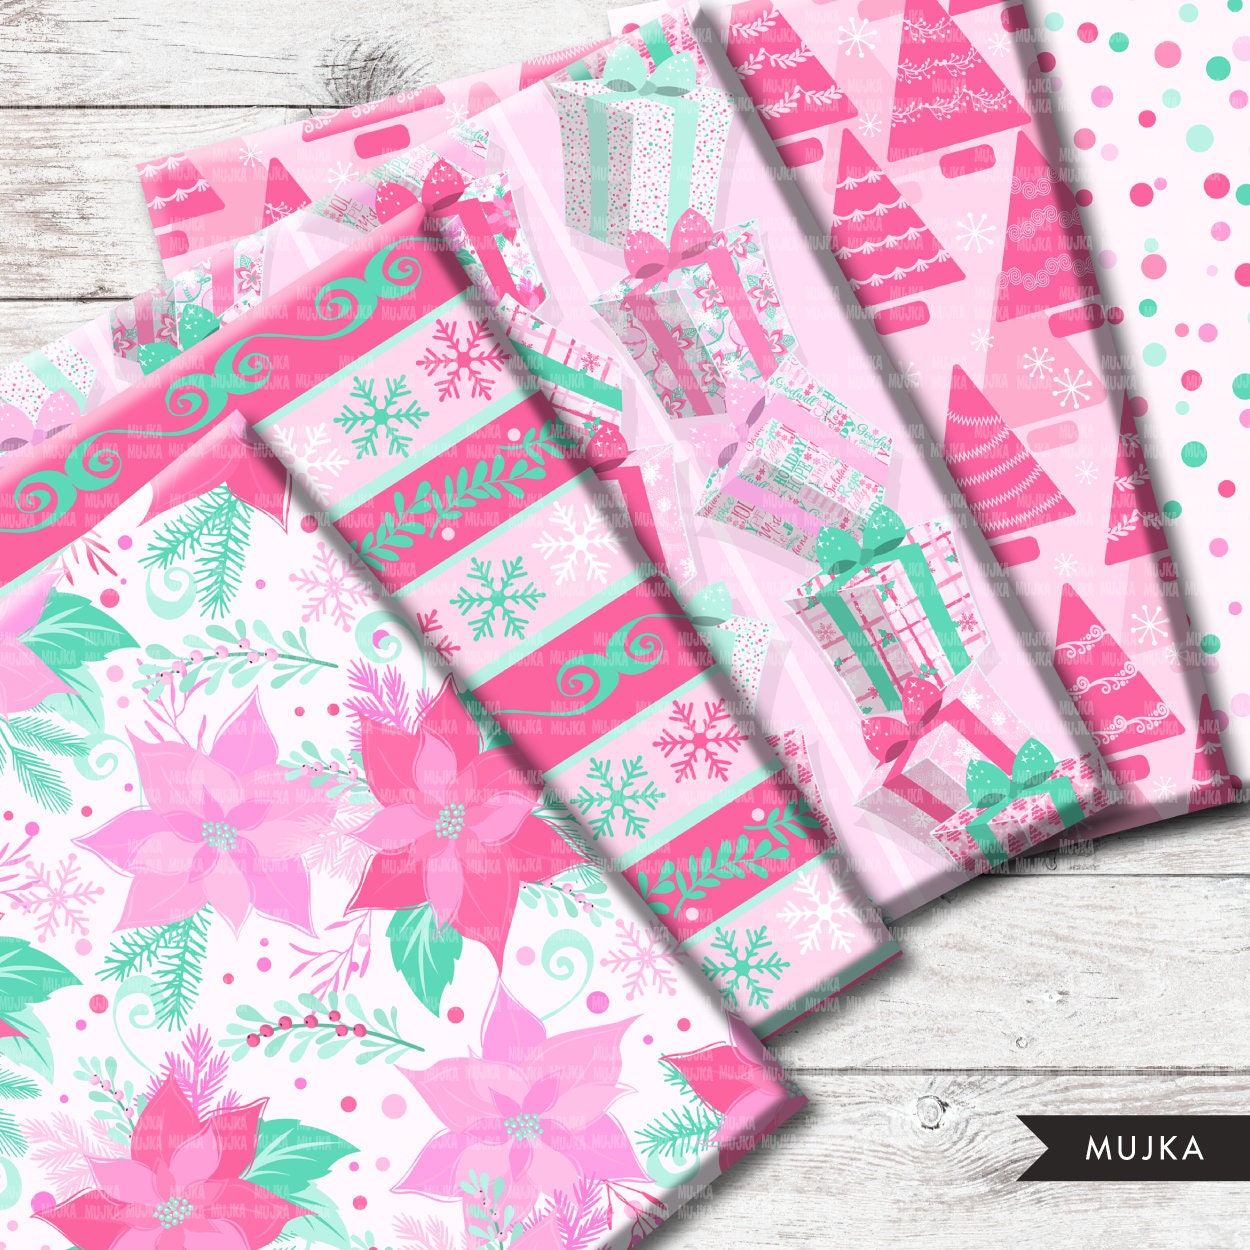 Christmas digital papers, pink Christmas papers, pastel Christmas papers, santa digital papers, pink christmas tree png, cute Christmas png